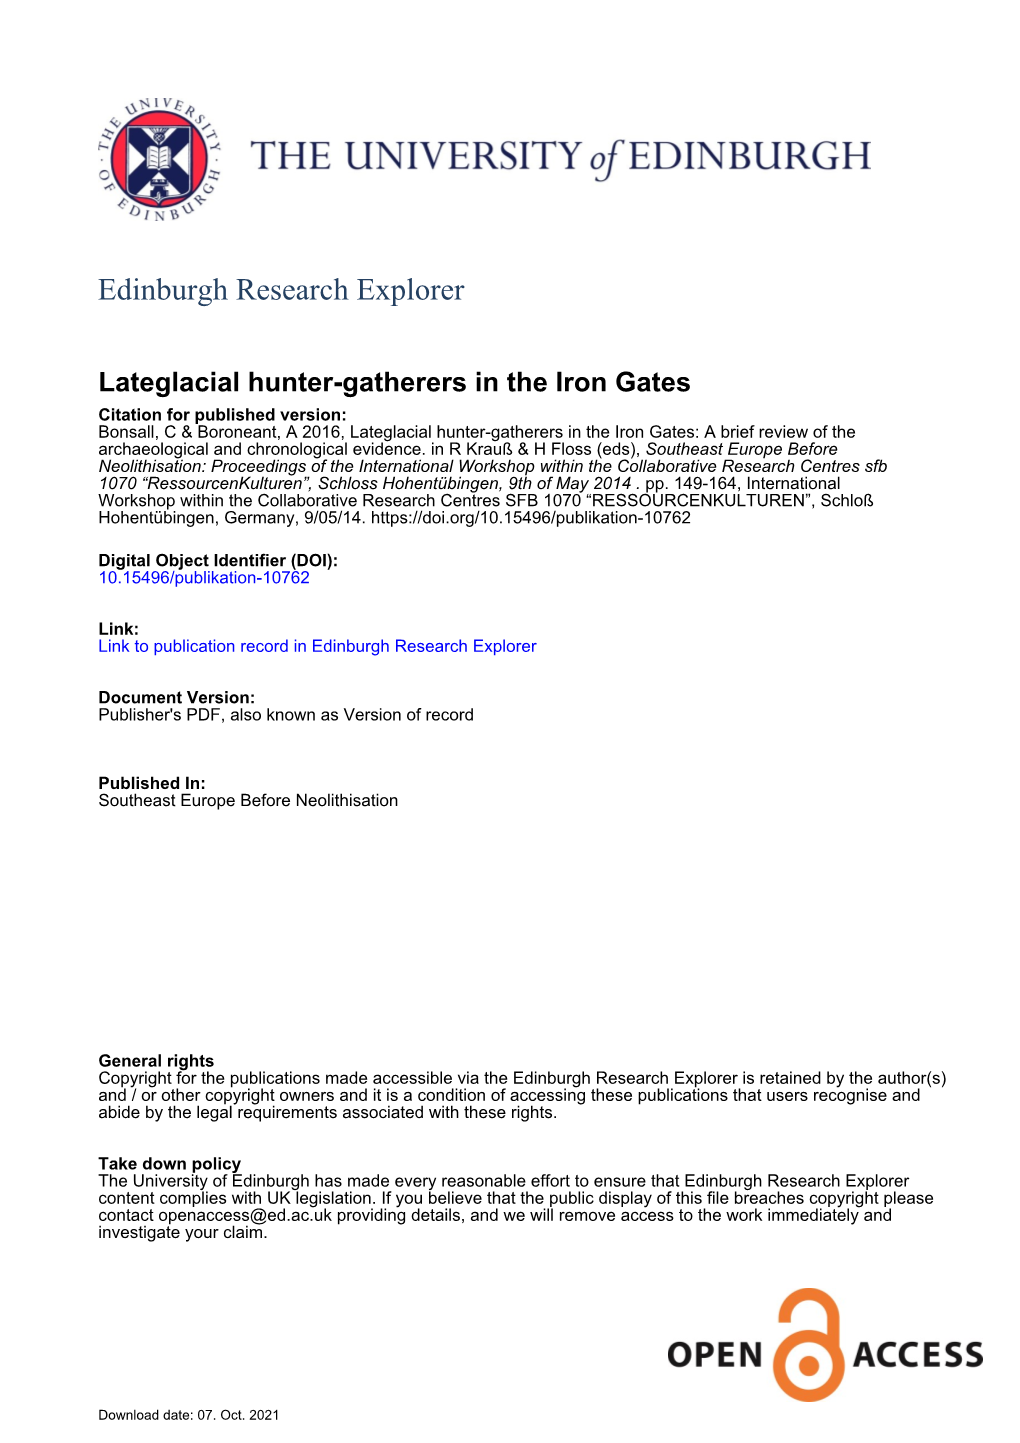 Lateglacial Hunter-Gatherers in the Iron Gates